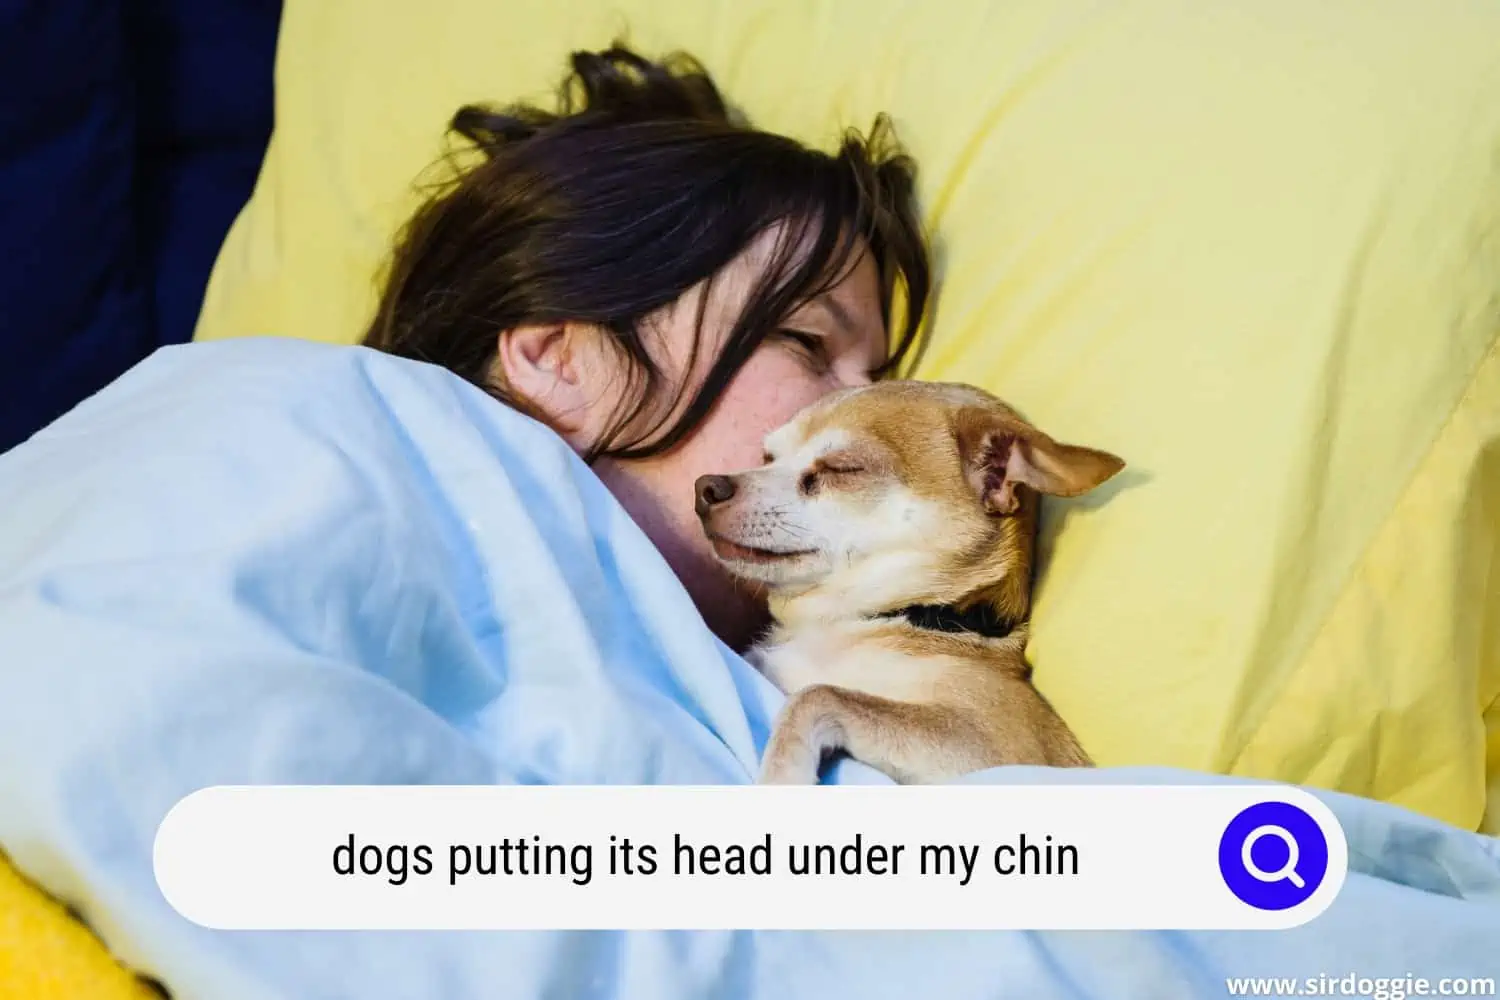 dog putting its head under owners chin while asleep